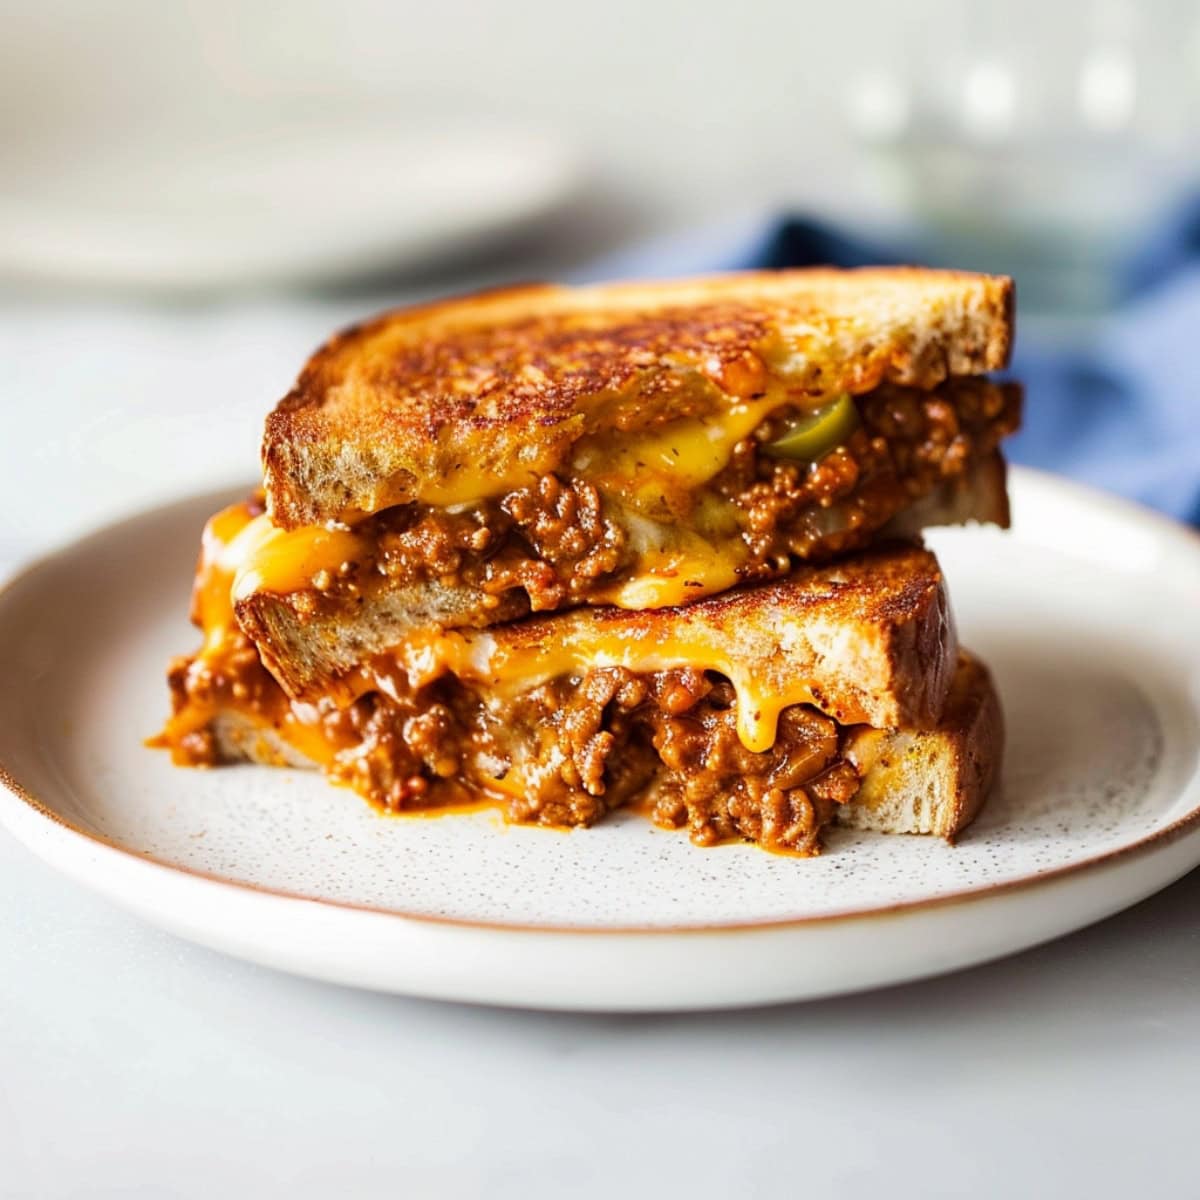 Delicious sloppy joe grilled cheese, featuring a hearty meat filling and crispy, golden-brown bread.